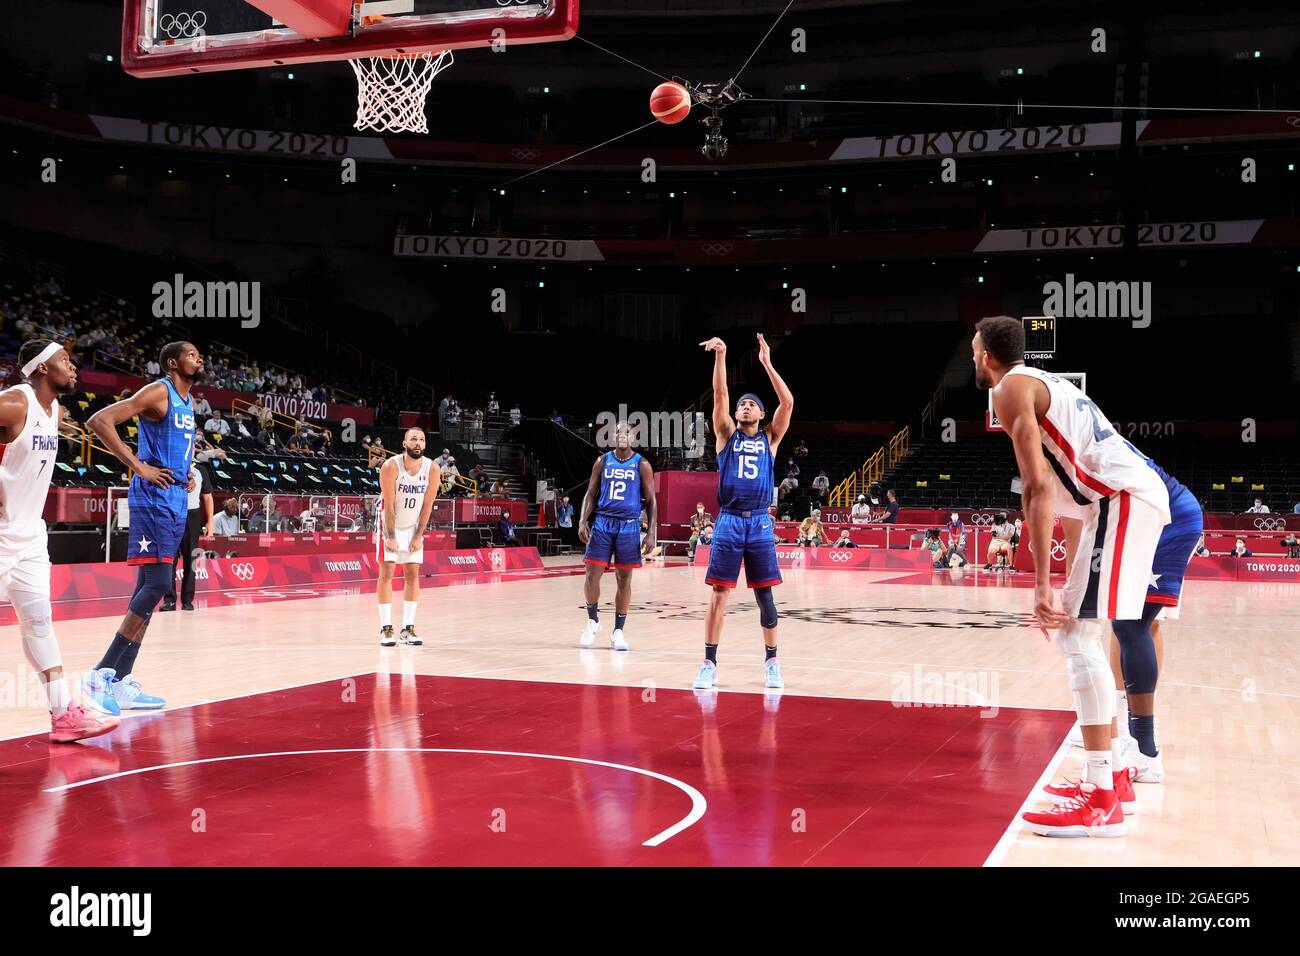 Tokyo, Japan, 25 July, 2021. Devin Booker of Team United States has a shot from the free throw line during the Men's Basketball Preliminary Round Group A  - Match 4 between France and USA on Day 2 of the Tokyo 2020 Olympic Games . Credit: Pete Dovgan/Speed Media/Alamy Live News Stock Photo